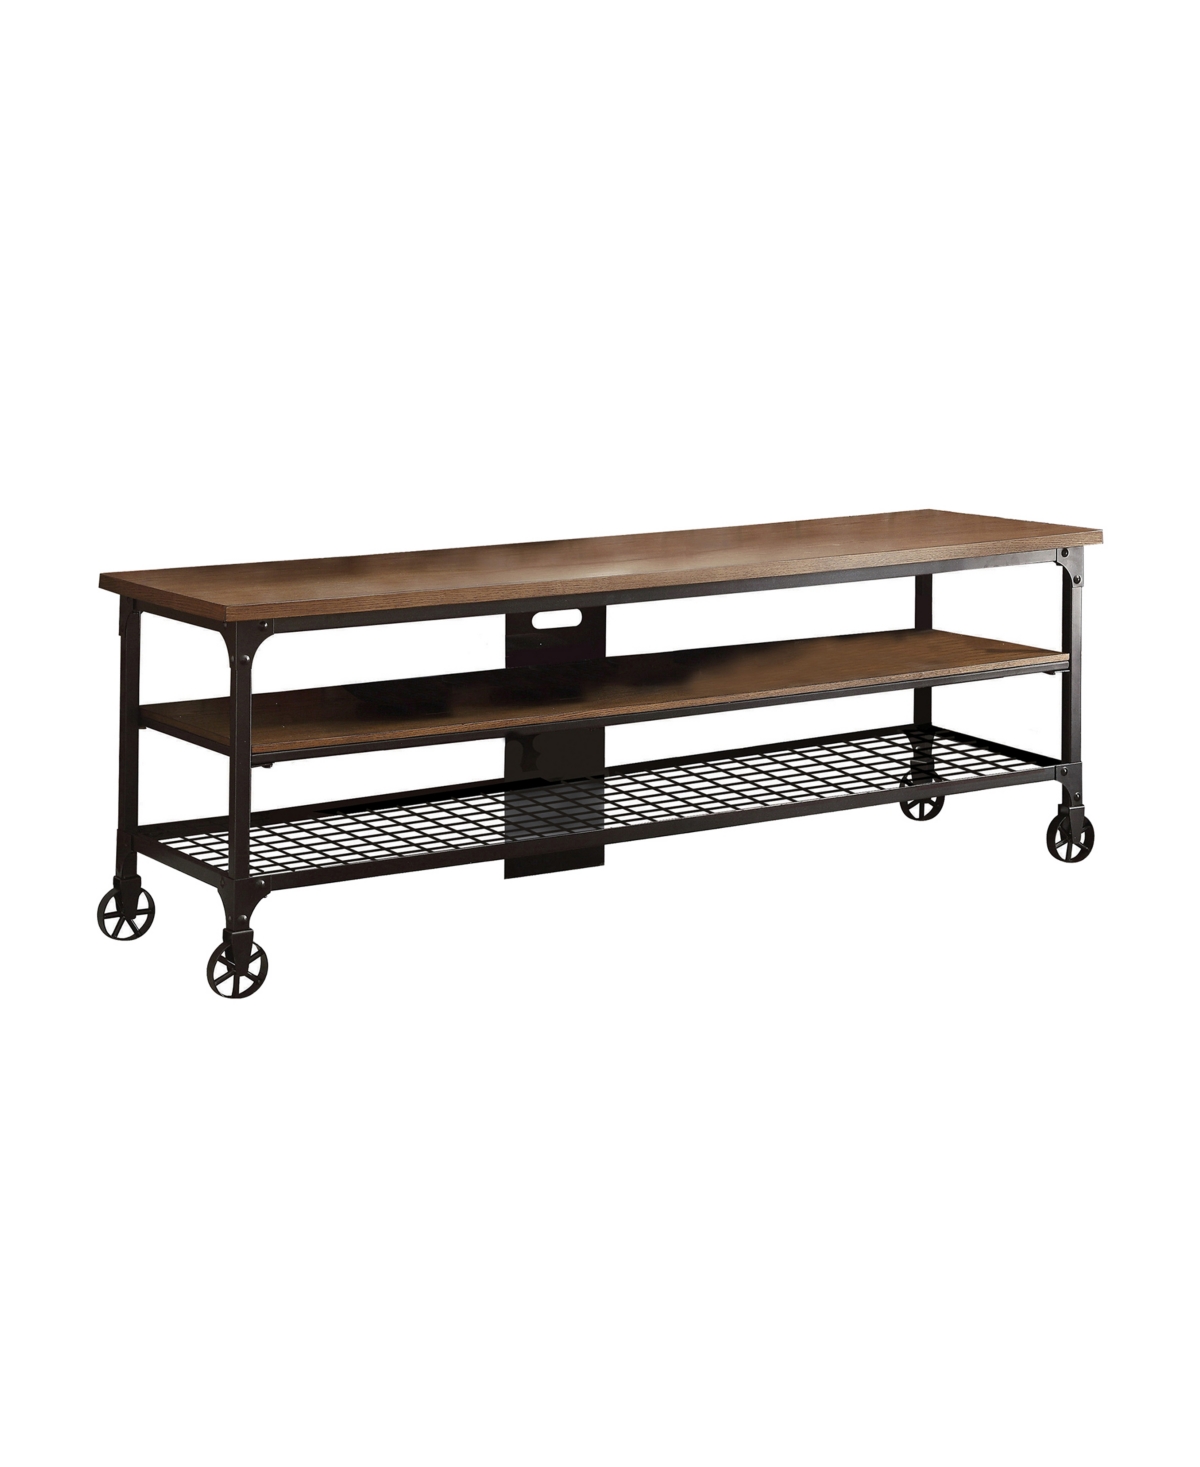 Furniture Thurmont 65 Inch Wide Tv Stand In -tone Finish- Weathered Natural And Rust